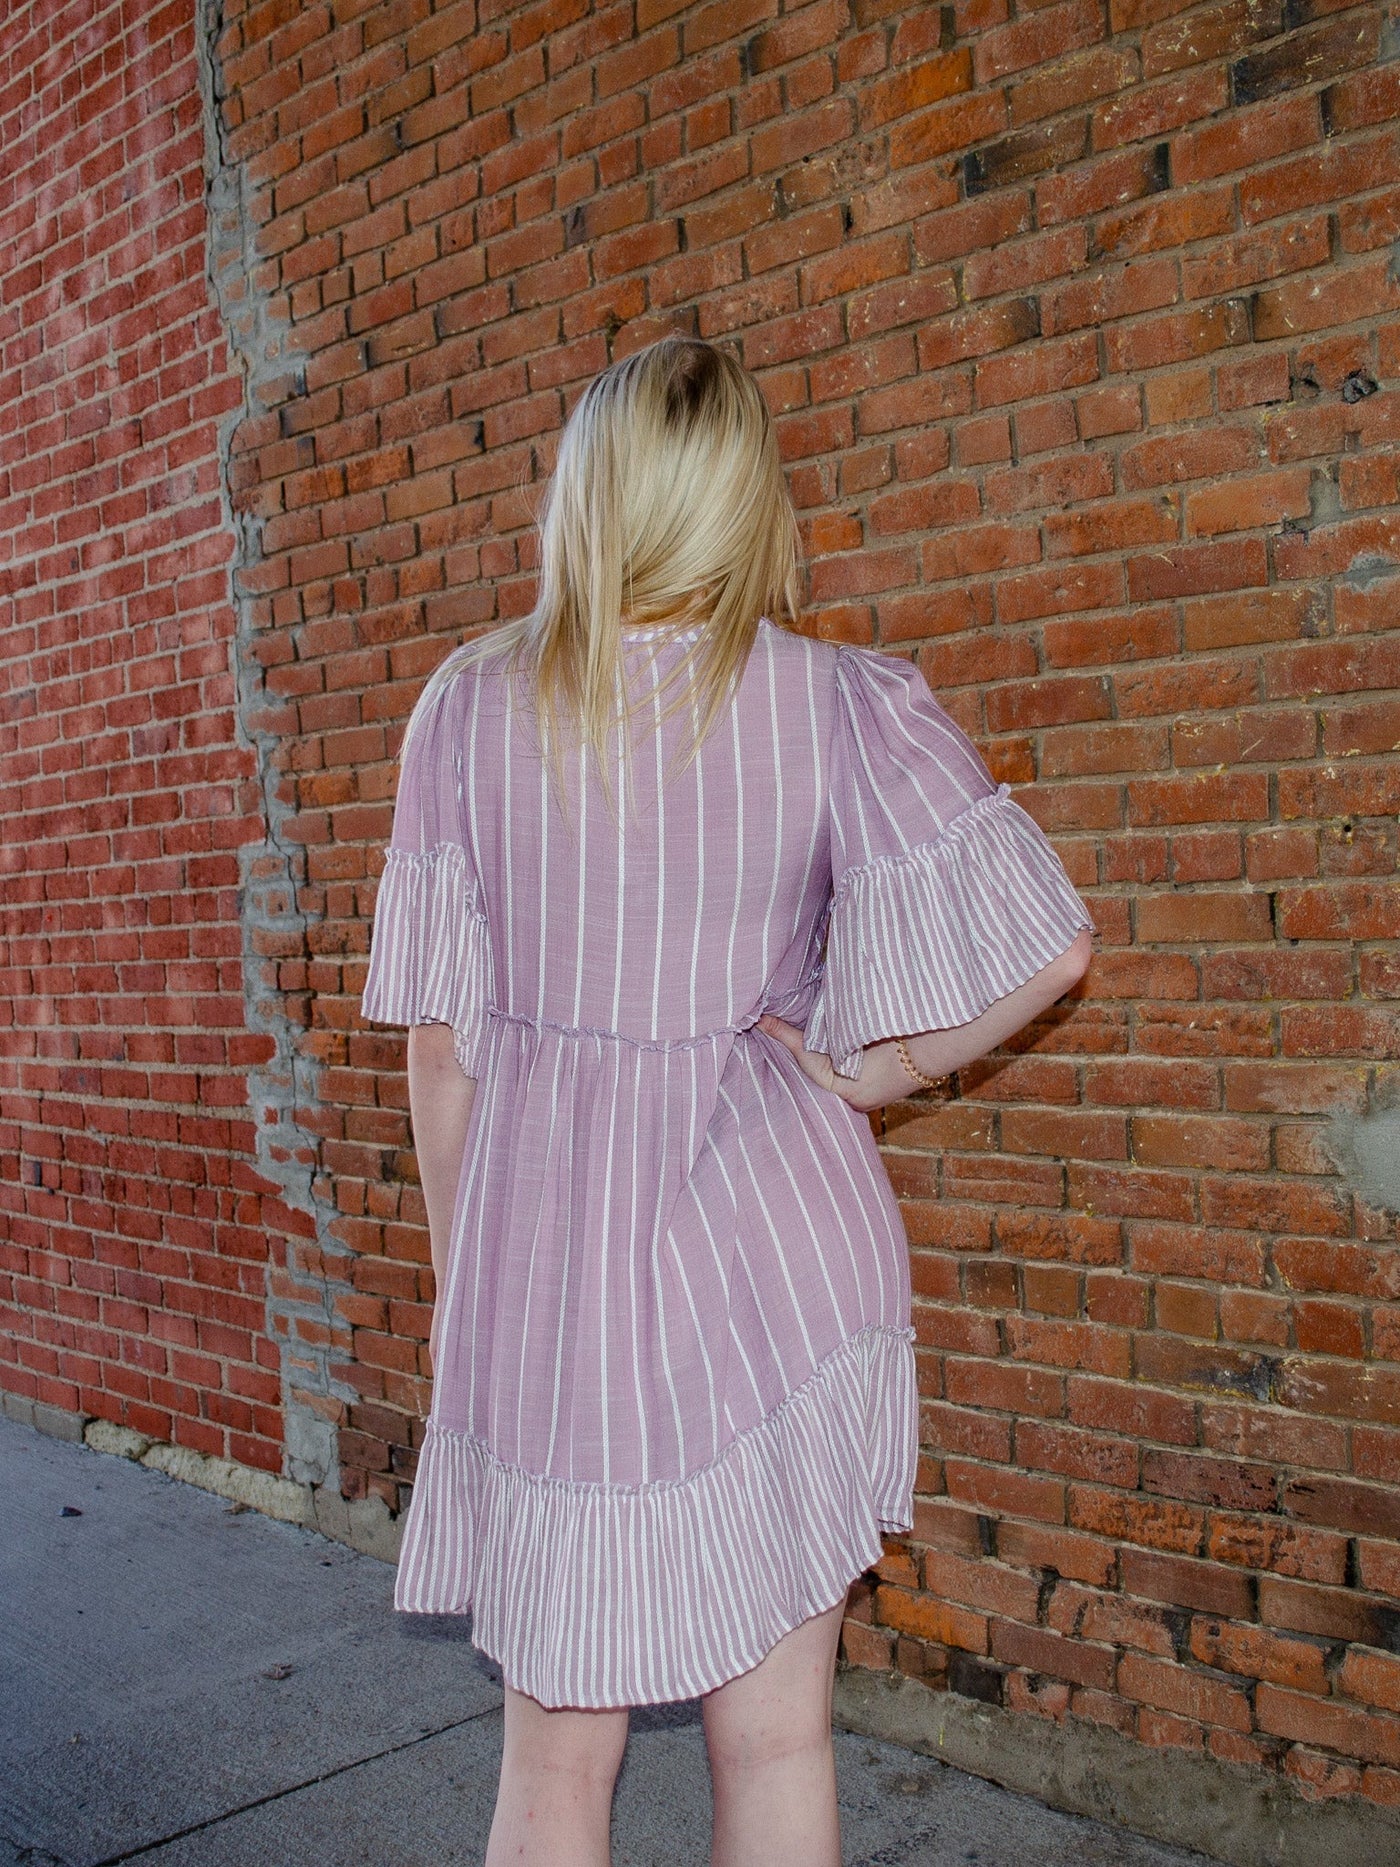 Model is wearing a striped purple and white half sleeve dress that is thigh length and cinches at waist. The neckline has string details to allows for adjusting of the open neck.